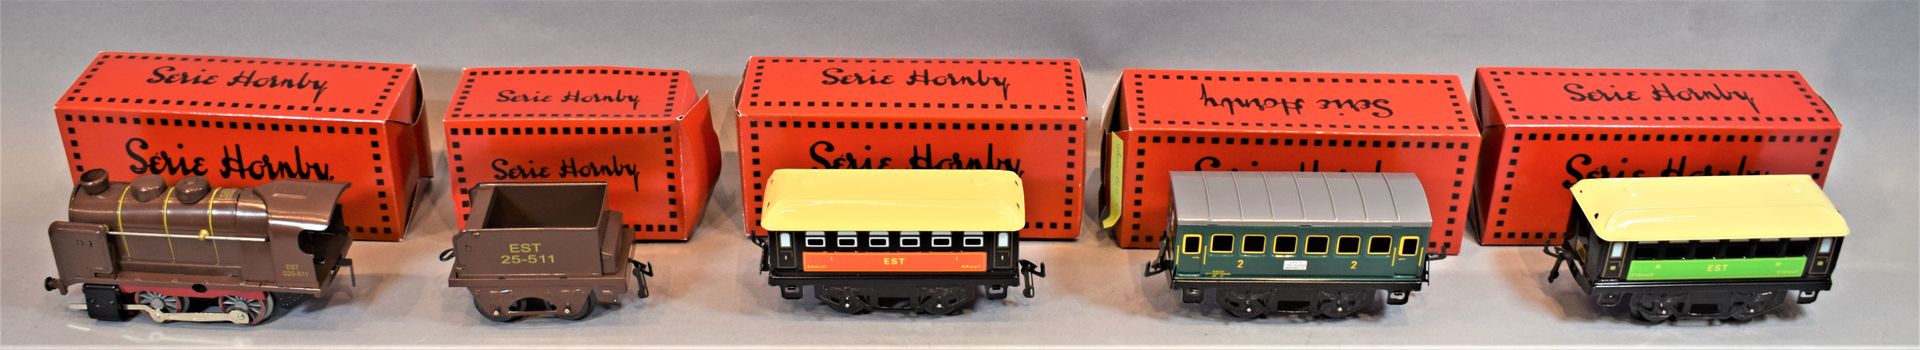 Null HACHETTE HORNBY Series 

 Locomotive and passenger cars, scale "O":



- S.&hellip;